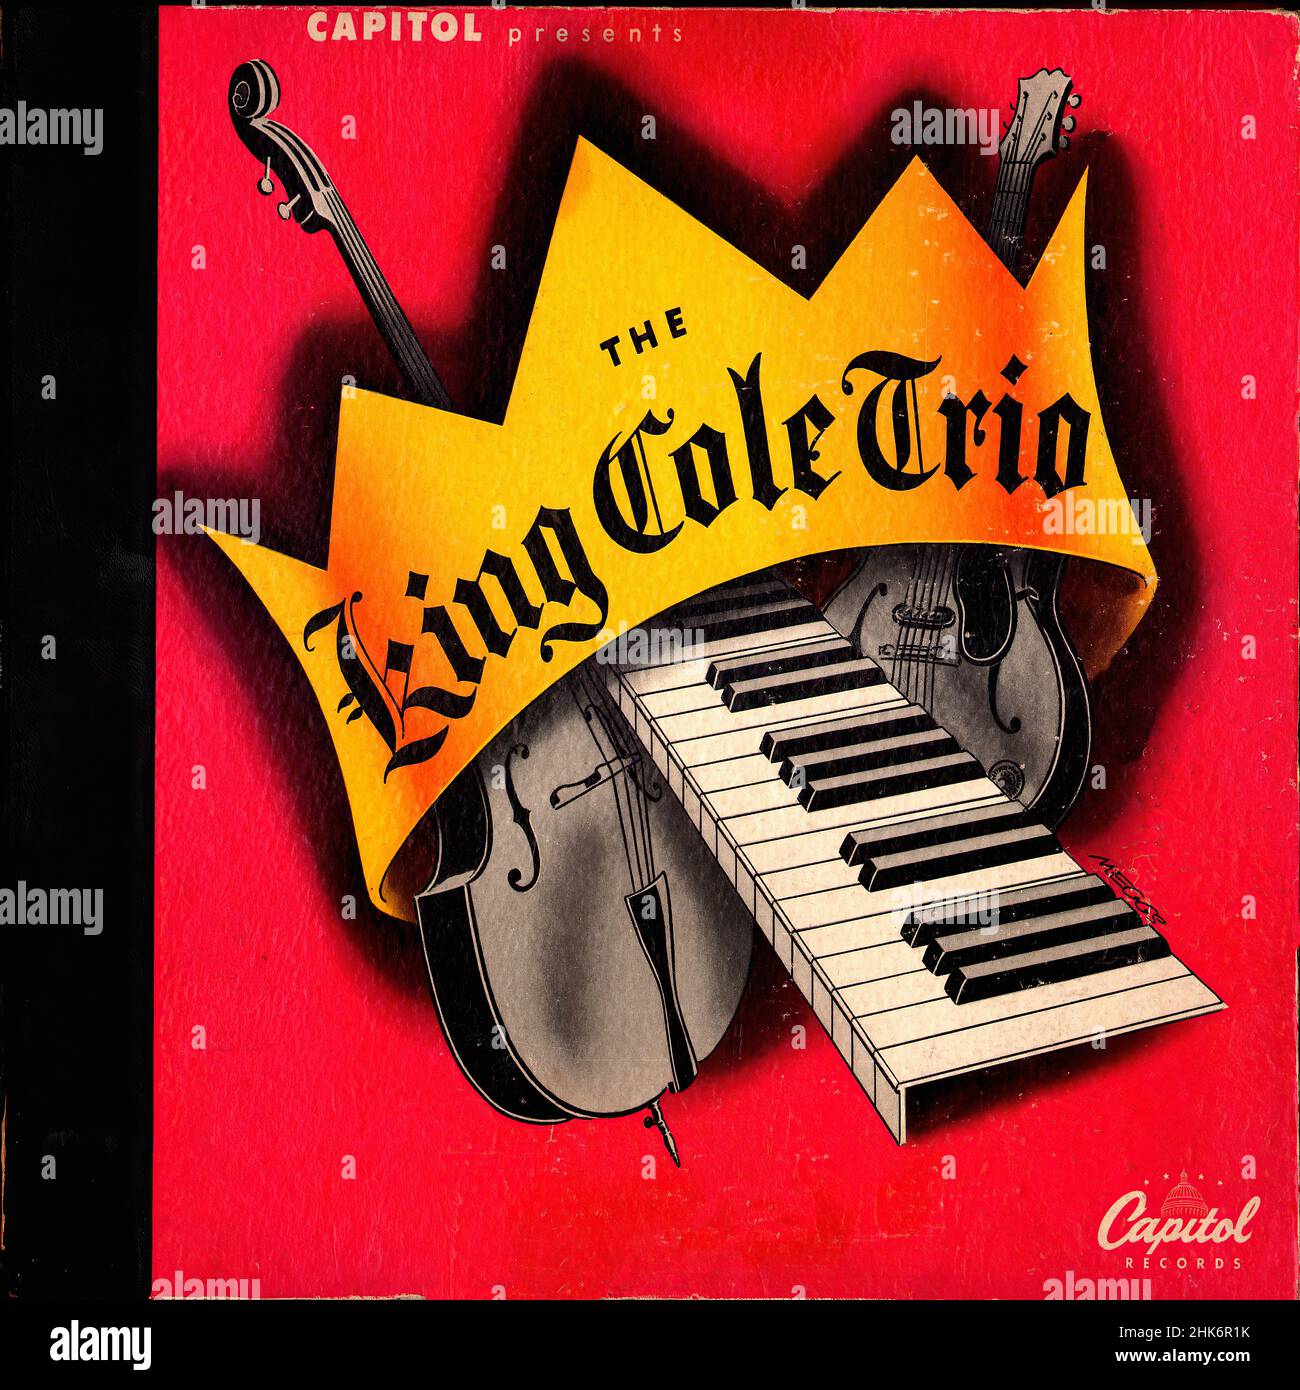 Vintage vinyl record cover - King Cole Trio, The - Capitol - 4 Records  Box with 78RPM Shellacs - US - 1944-P1 k 02 Stock Photo